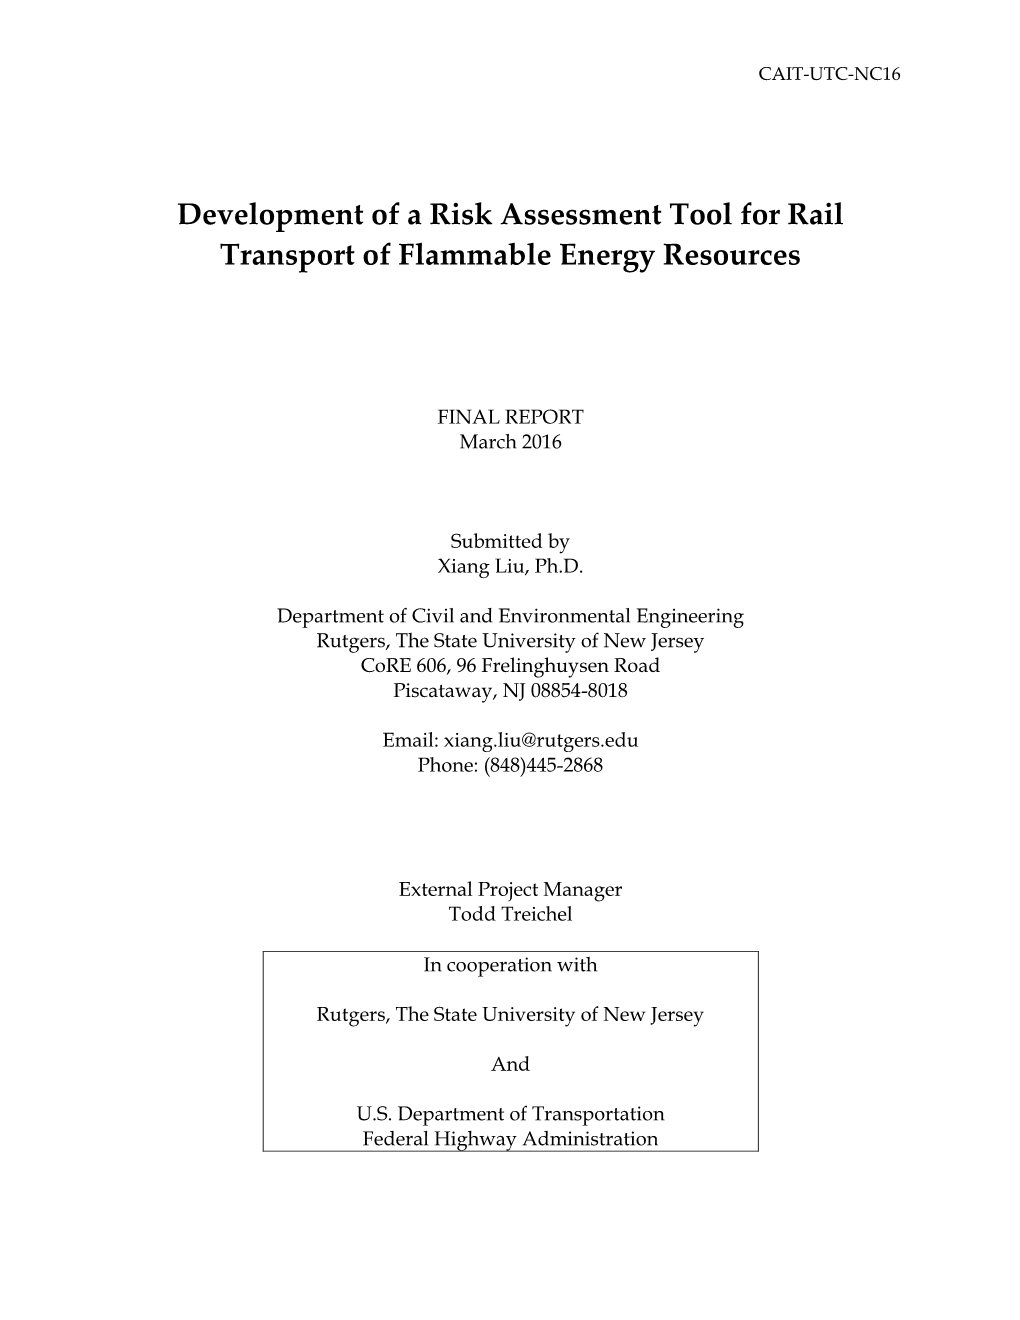 Development of a Risk Assessment Tool for Rail Transport of Flammable Energy Resources